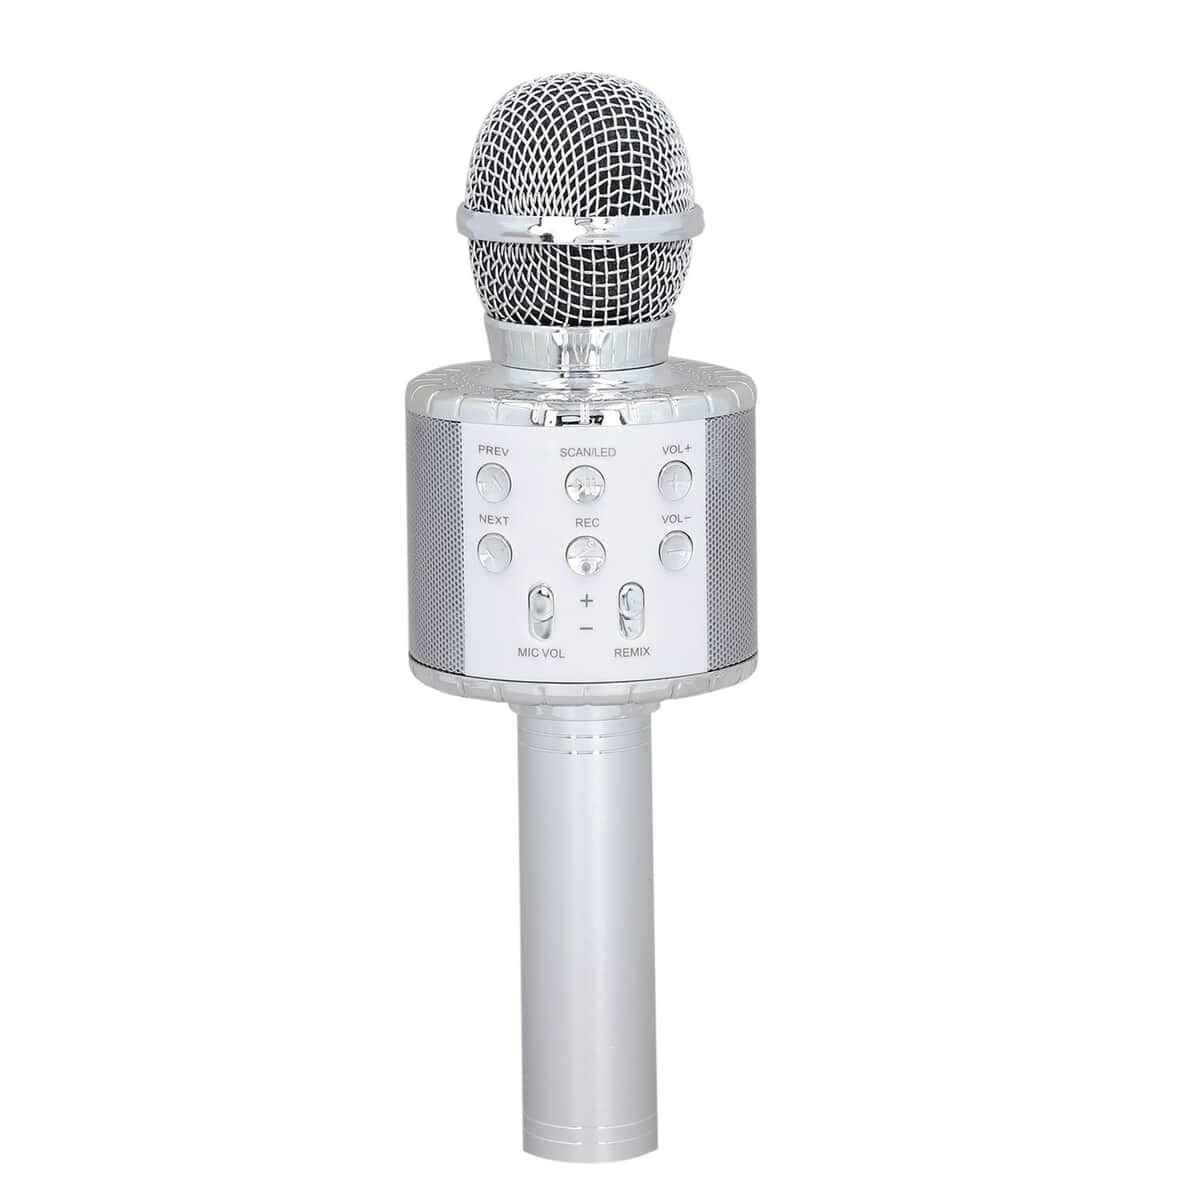 Black Wireless Bluetooth Karaoke Microphone with LED Lights and USB Charger (3.35"x3.27"x10.24") image number 0